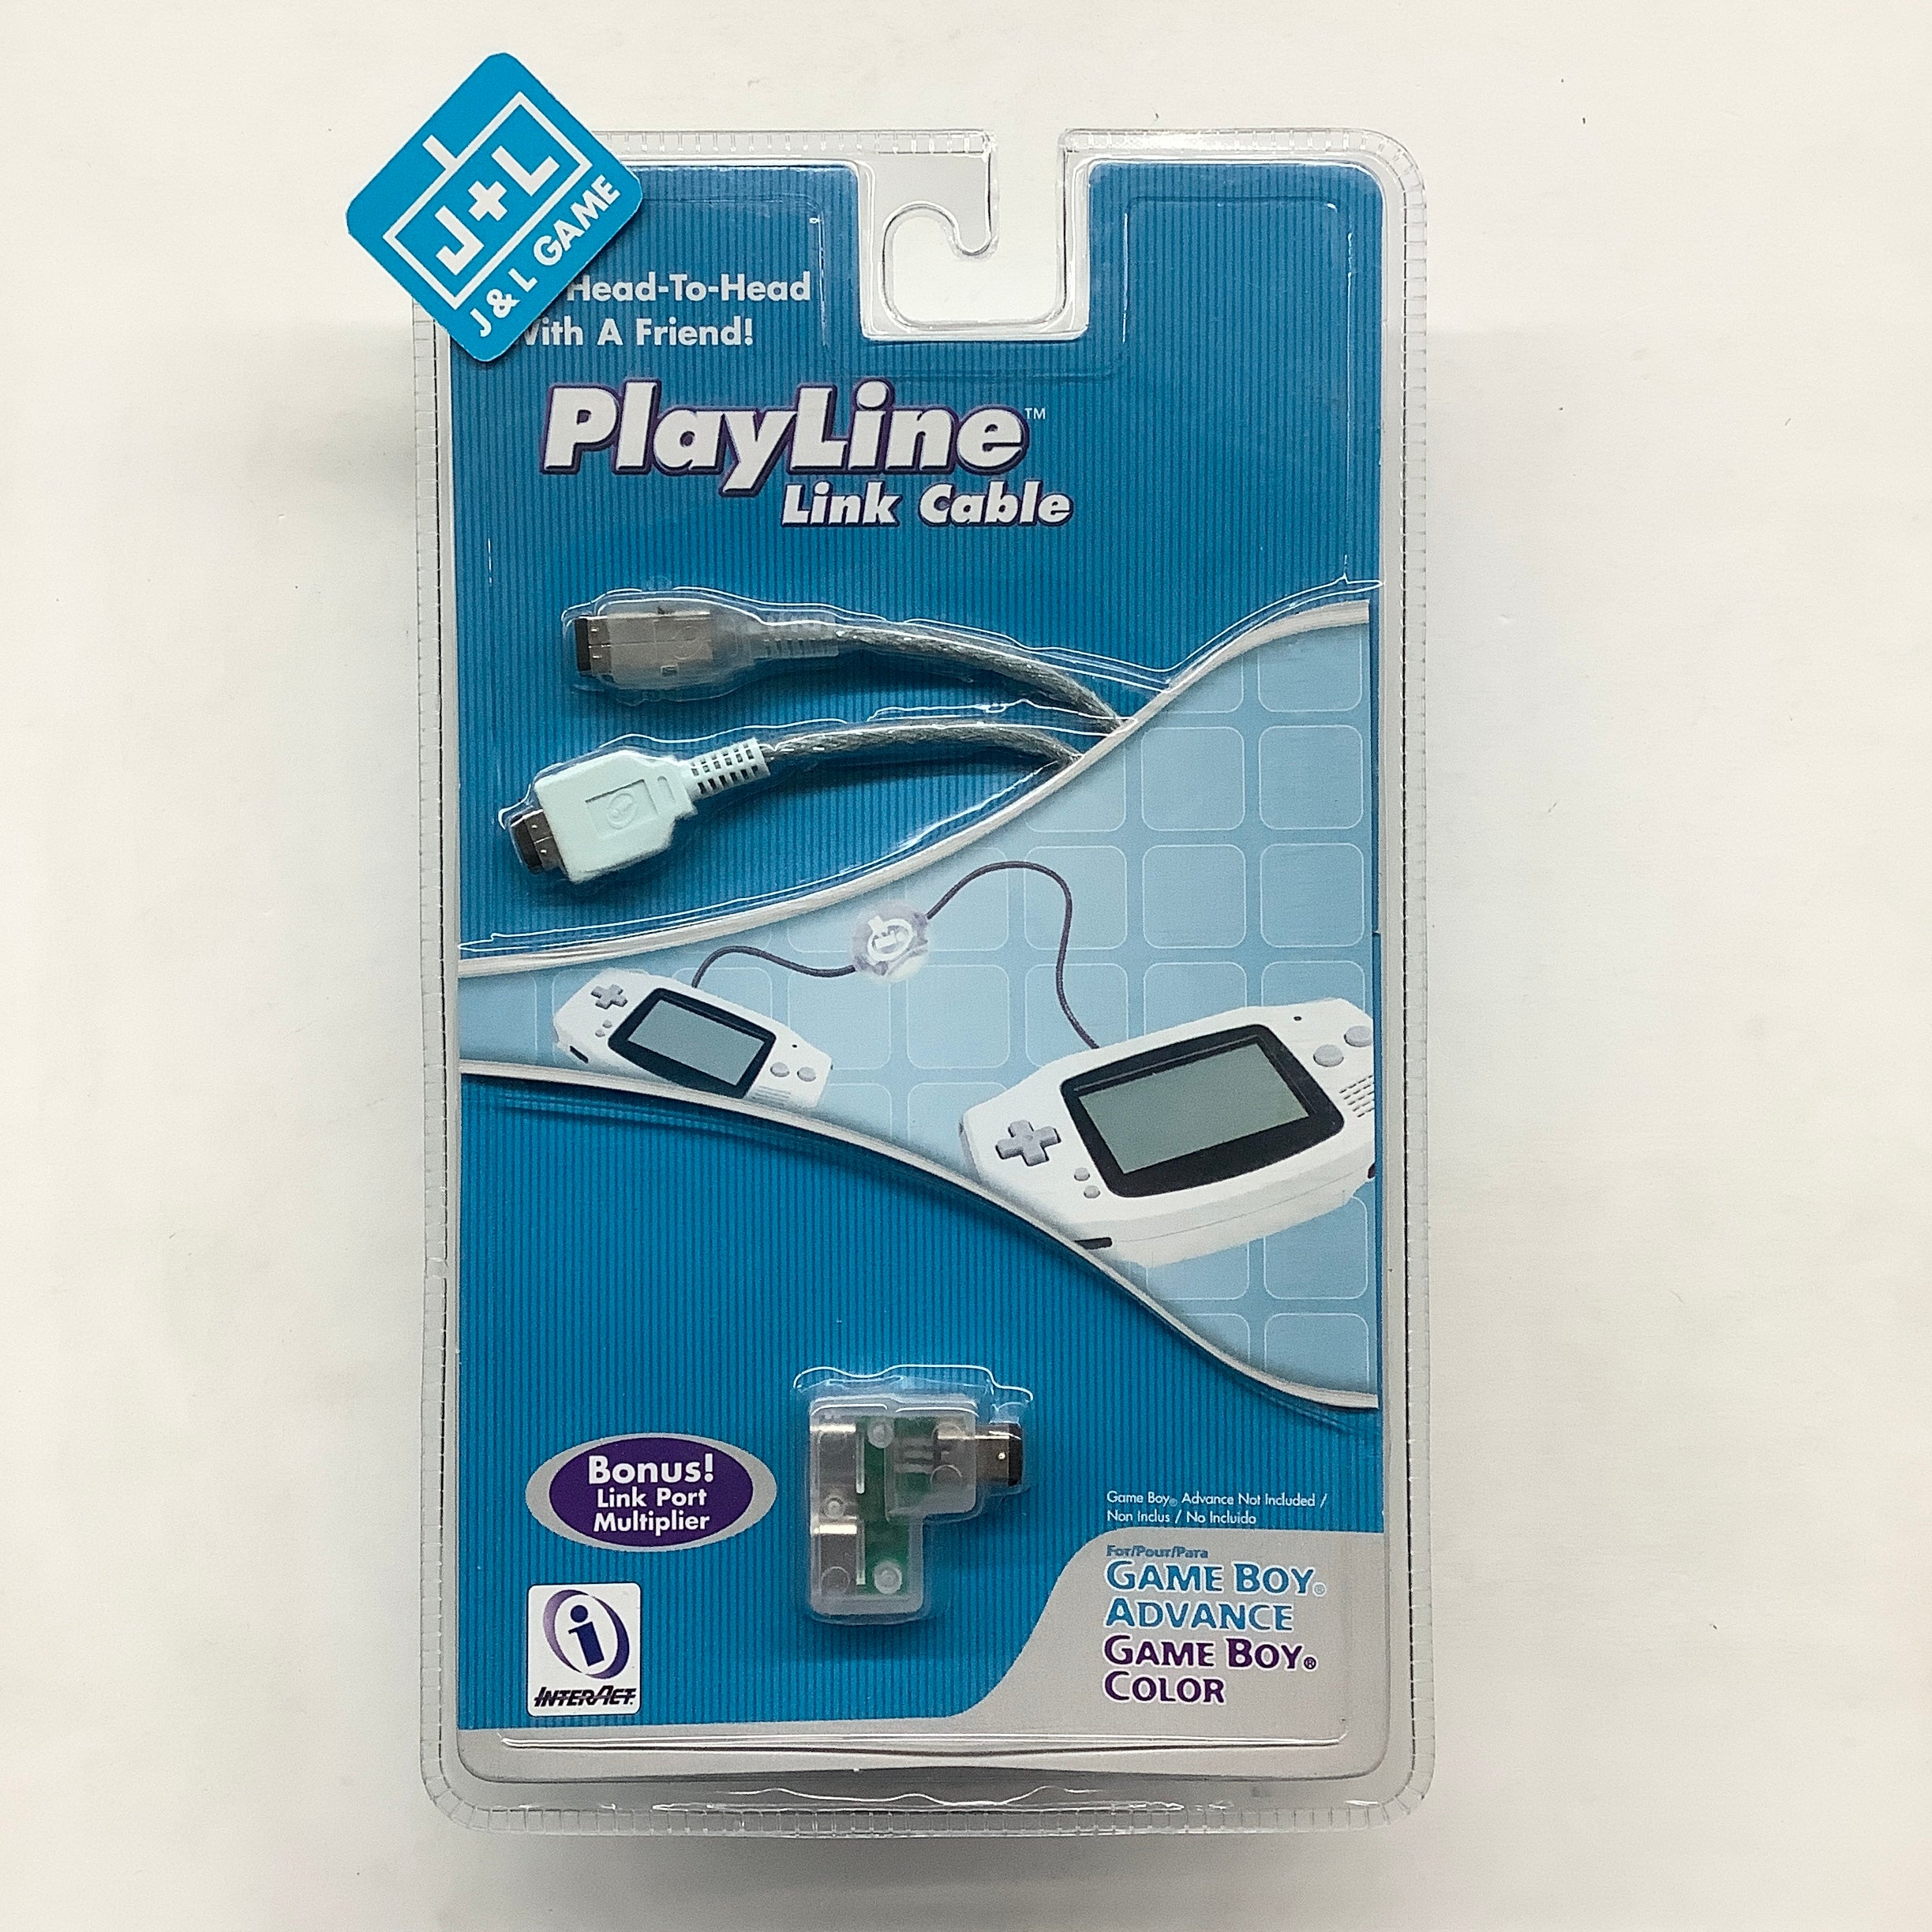 InterAct PlayLine Link Cable for Game Boy Advance and Game Boy Color - (GBA) Game Boy Advance Accessories Inter Act   